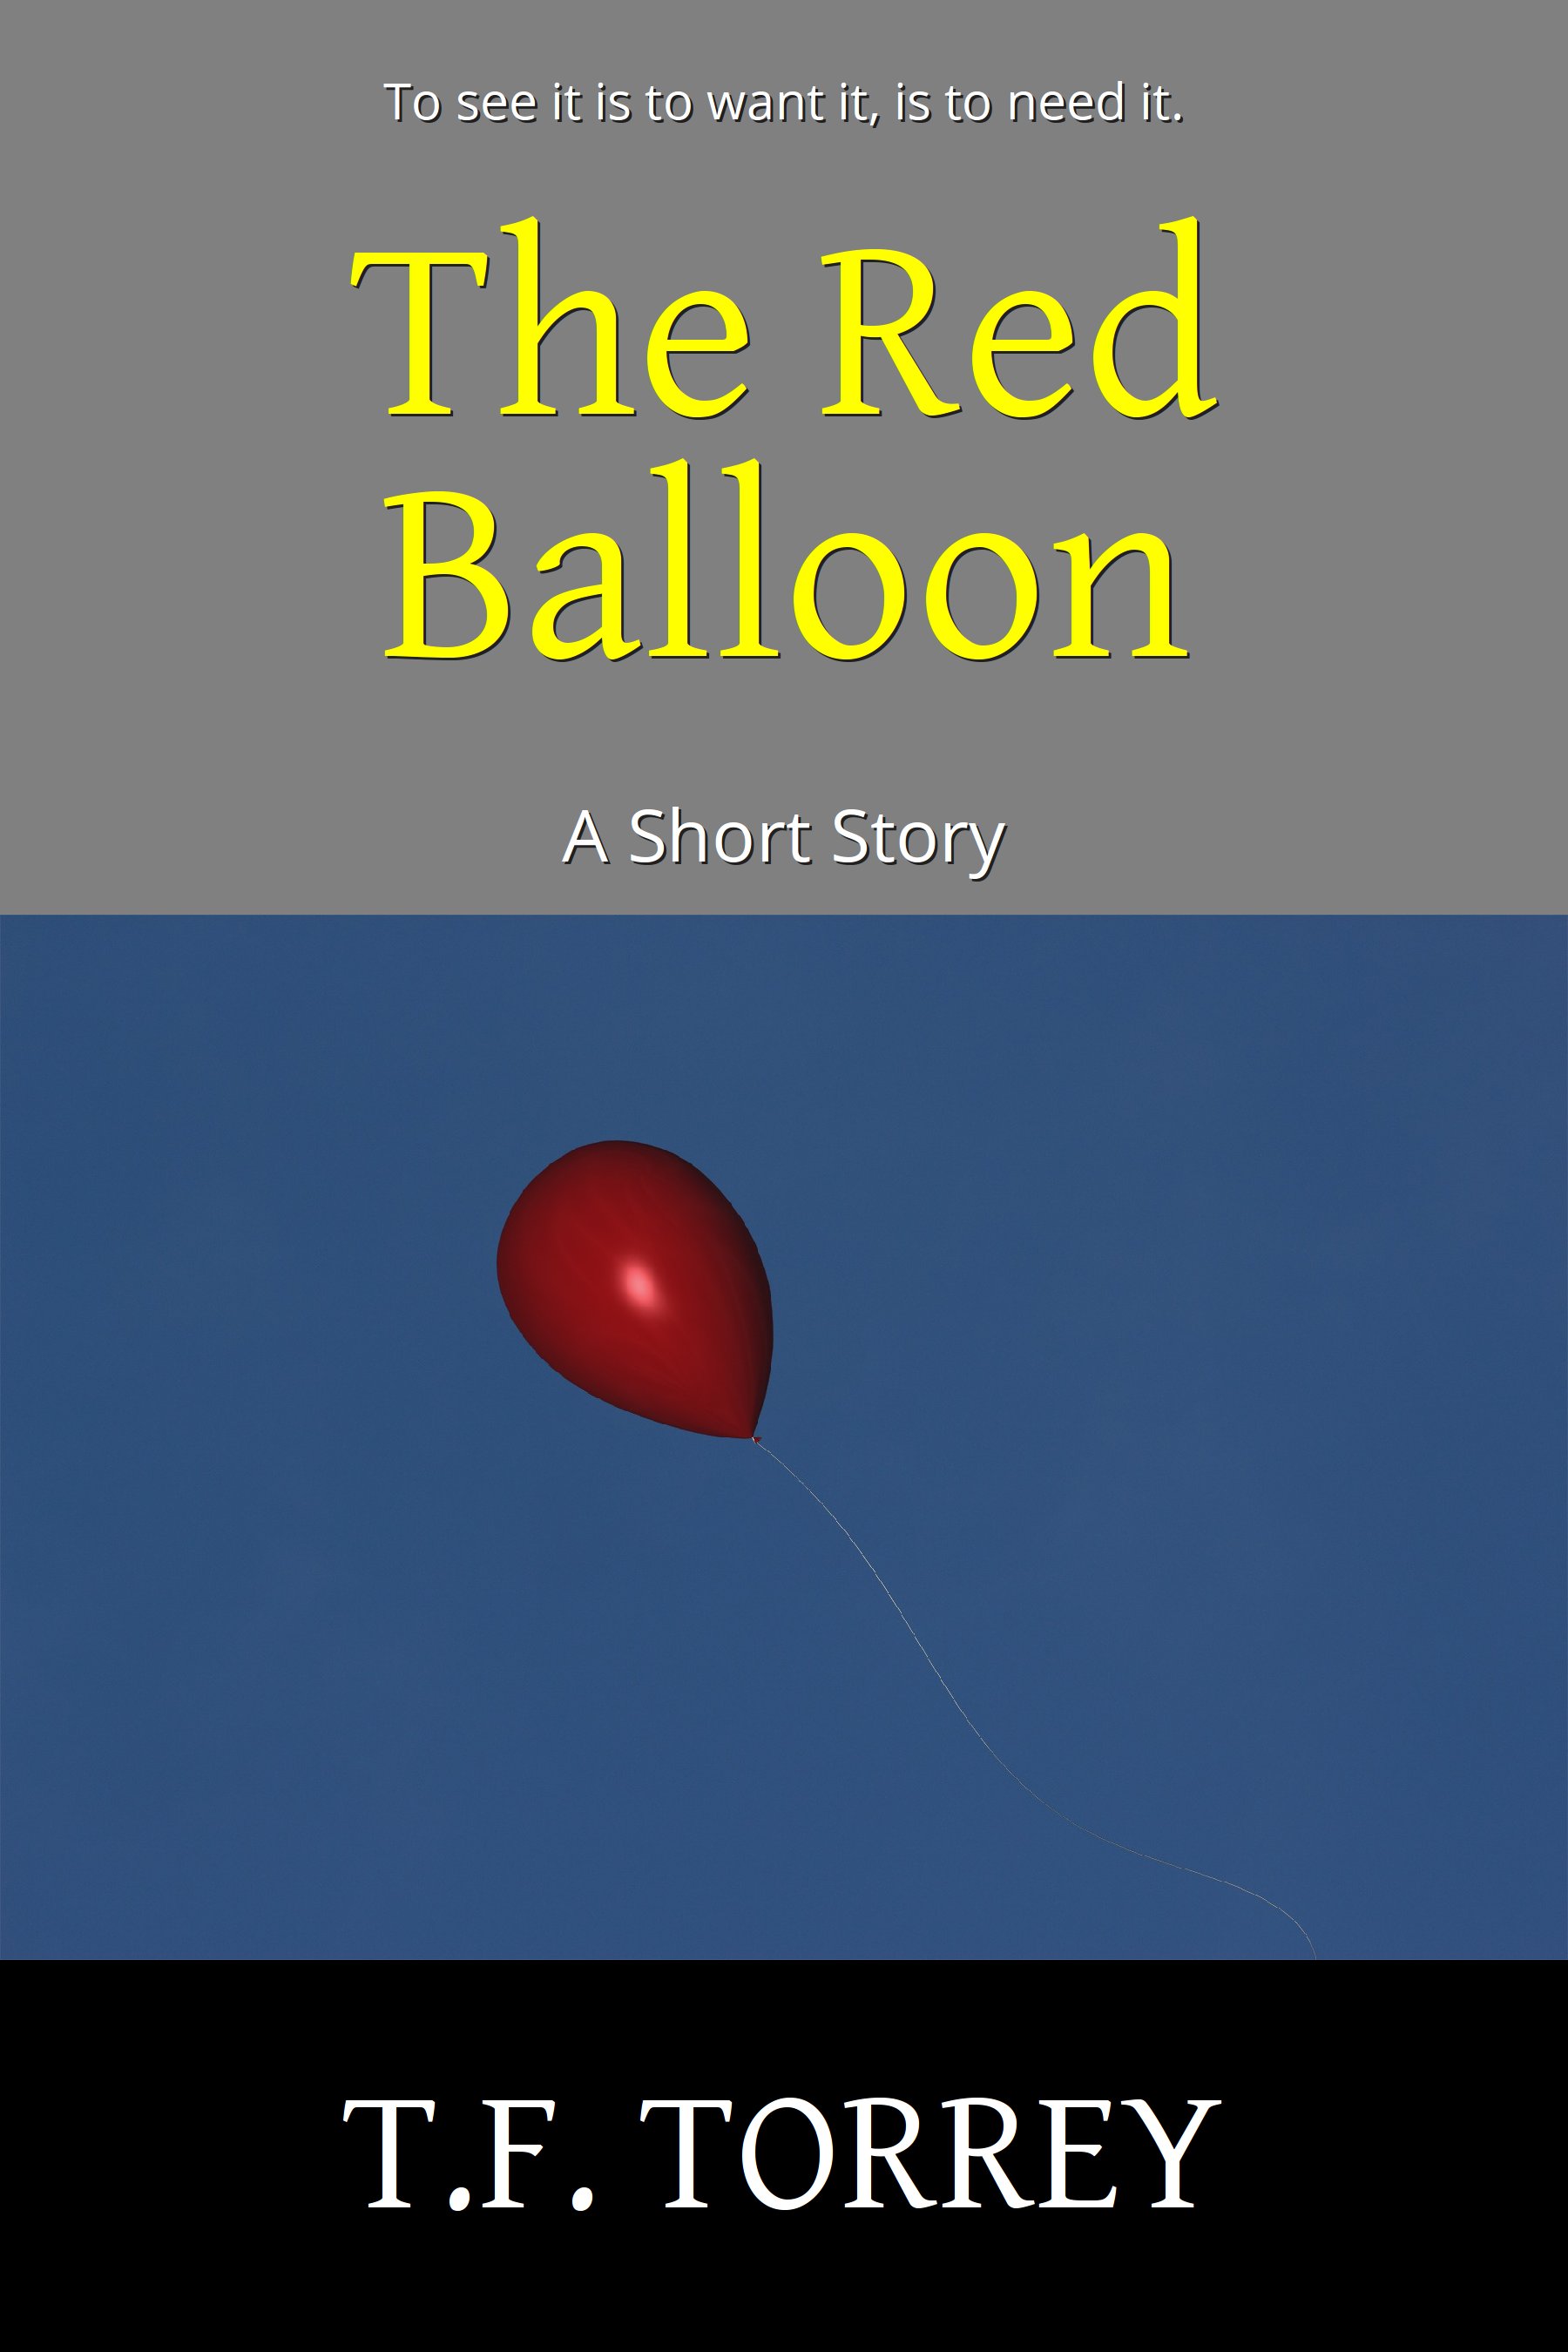 Cover of The Red Balloon: A Short Story by T.F. Torrey